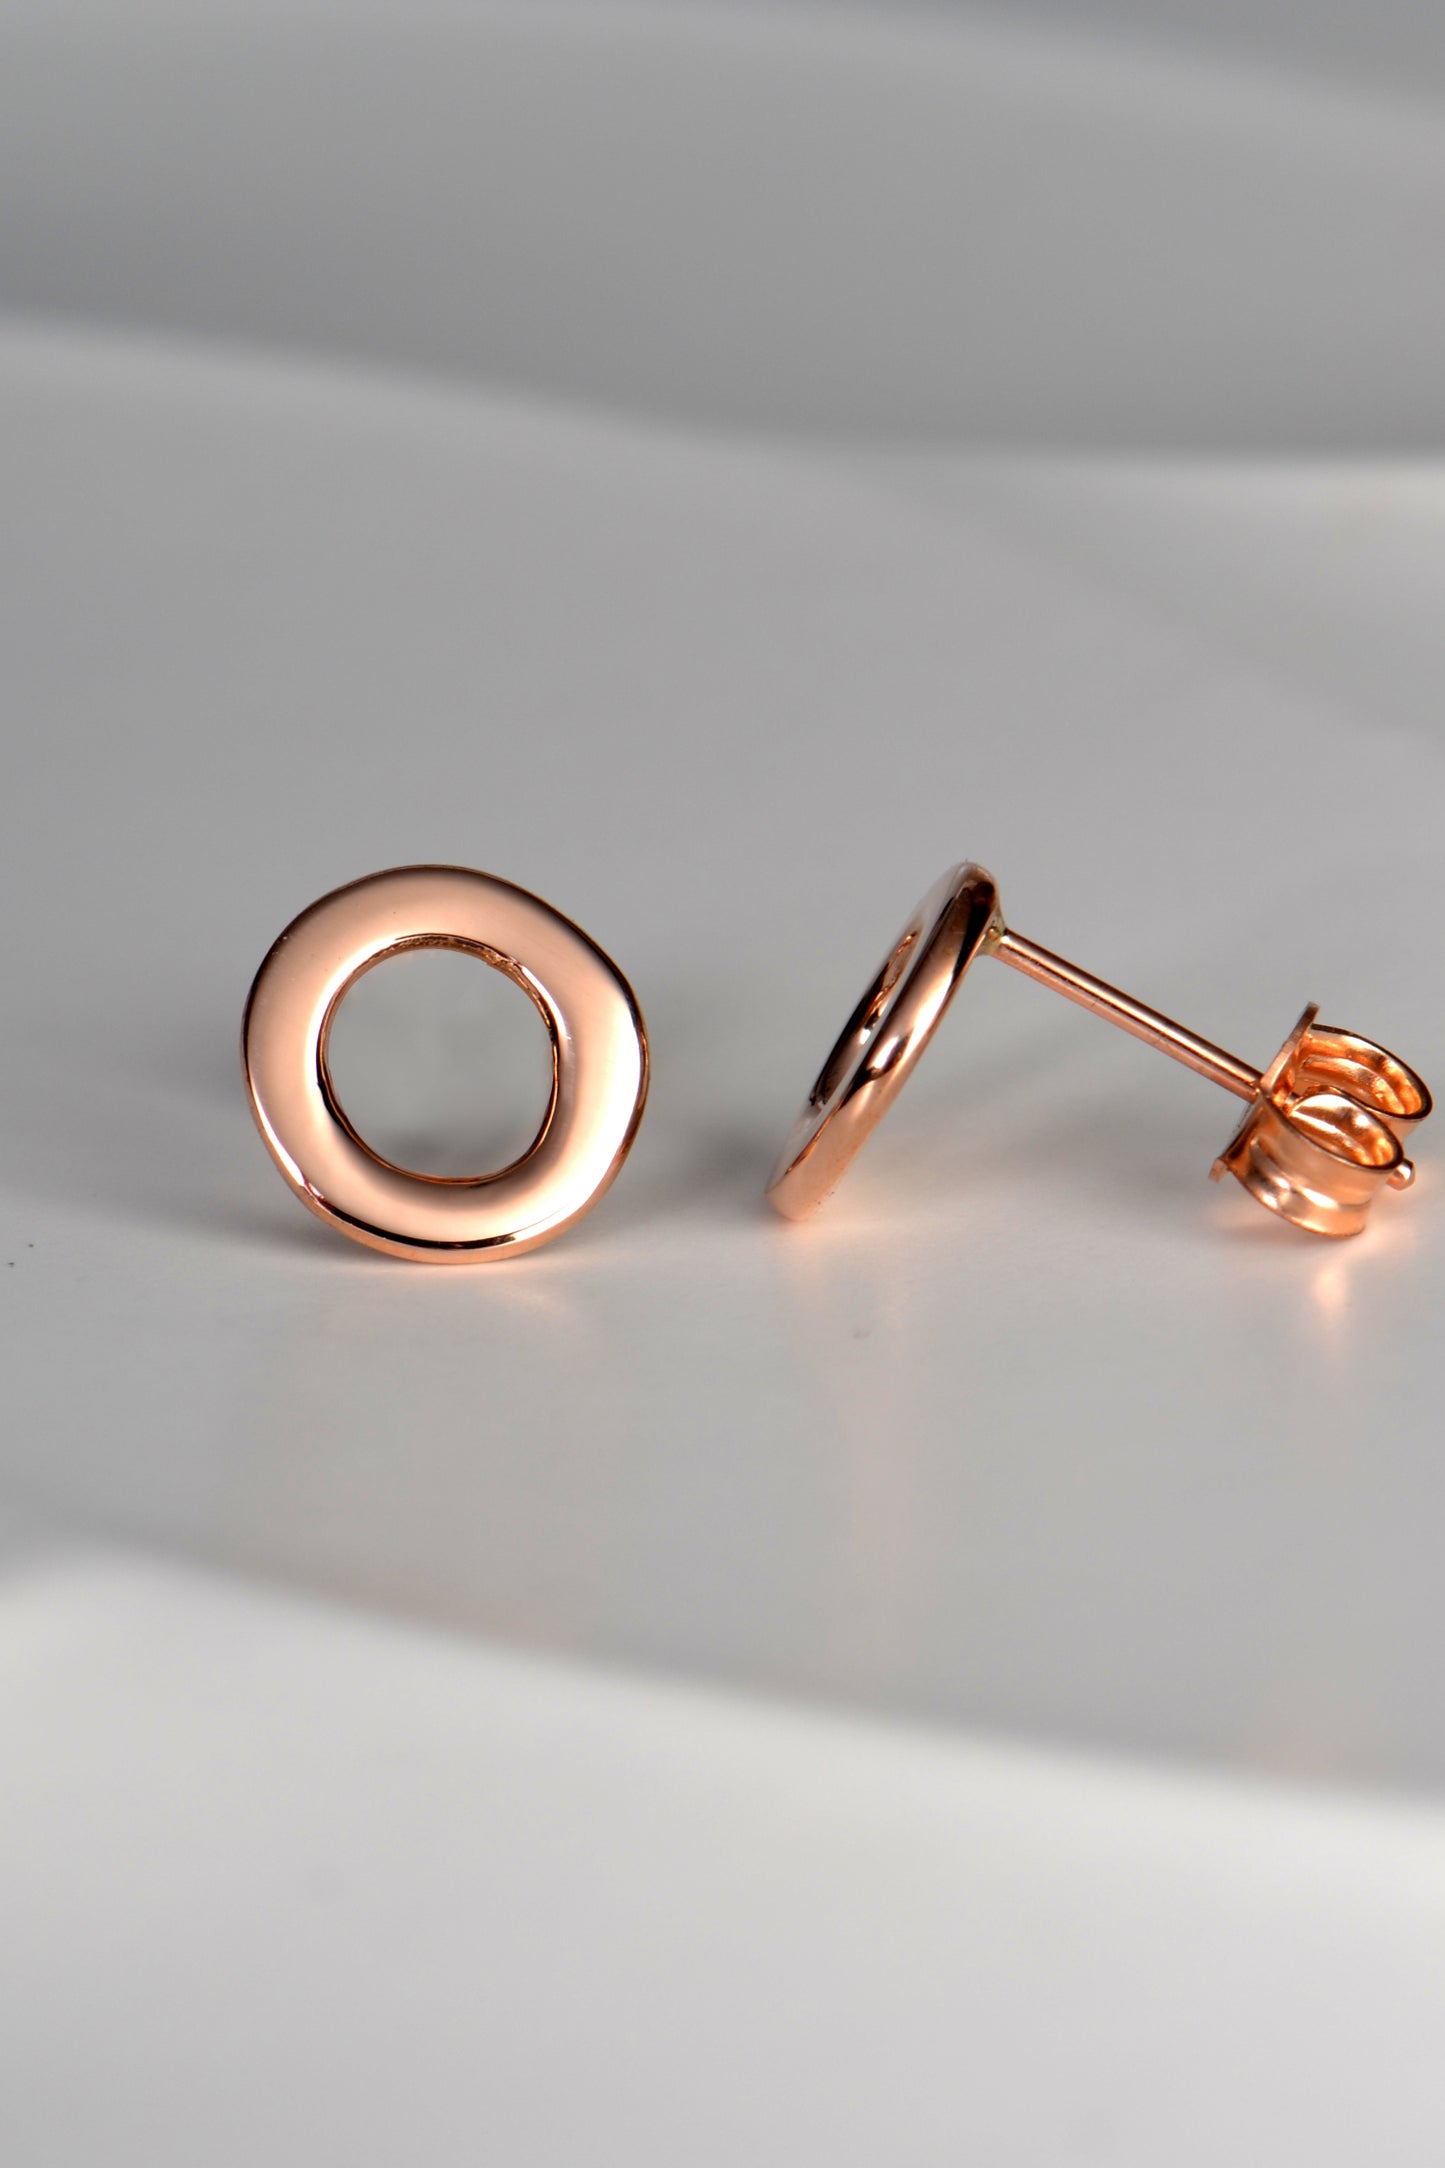 rose gold circle earrings shown side on so you can see that they are flat and sit close to the earlobe